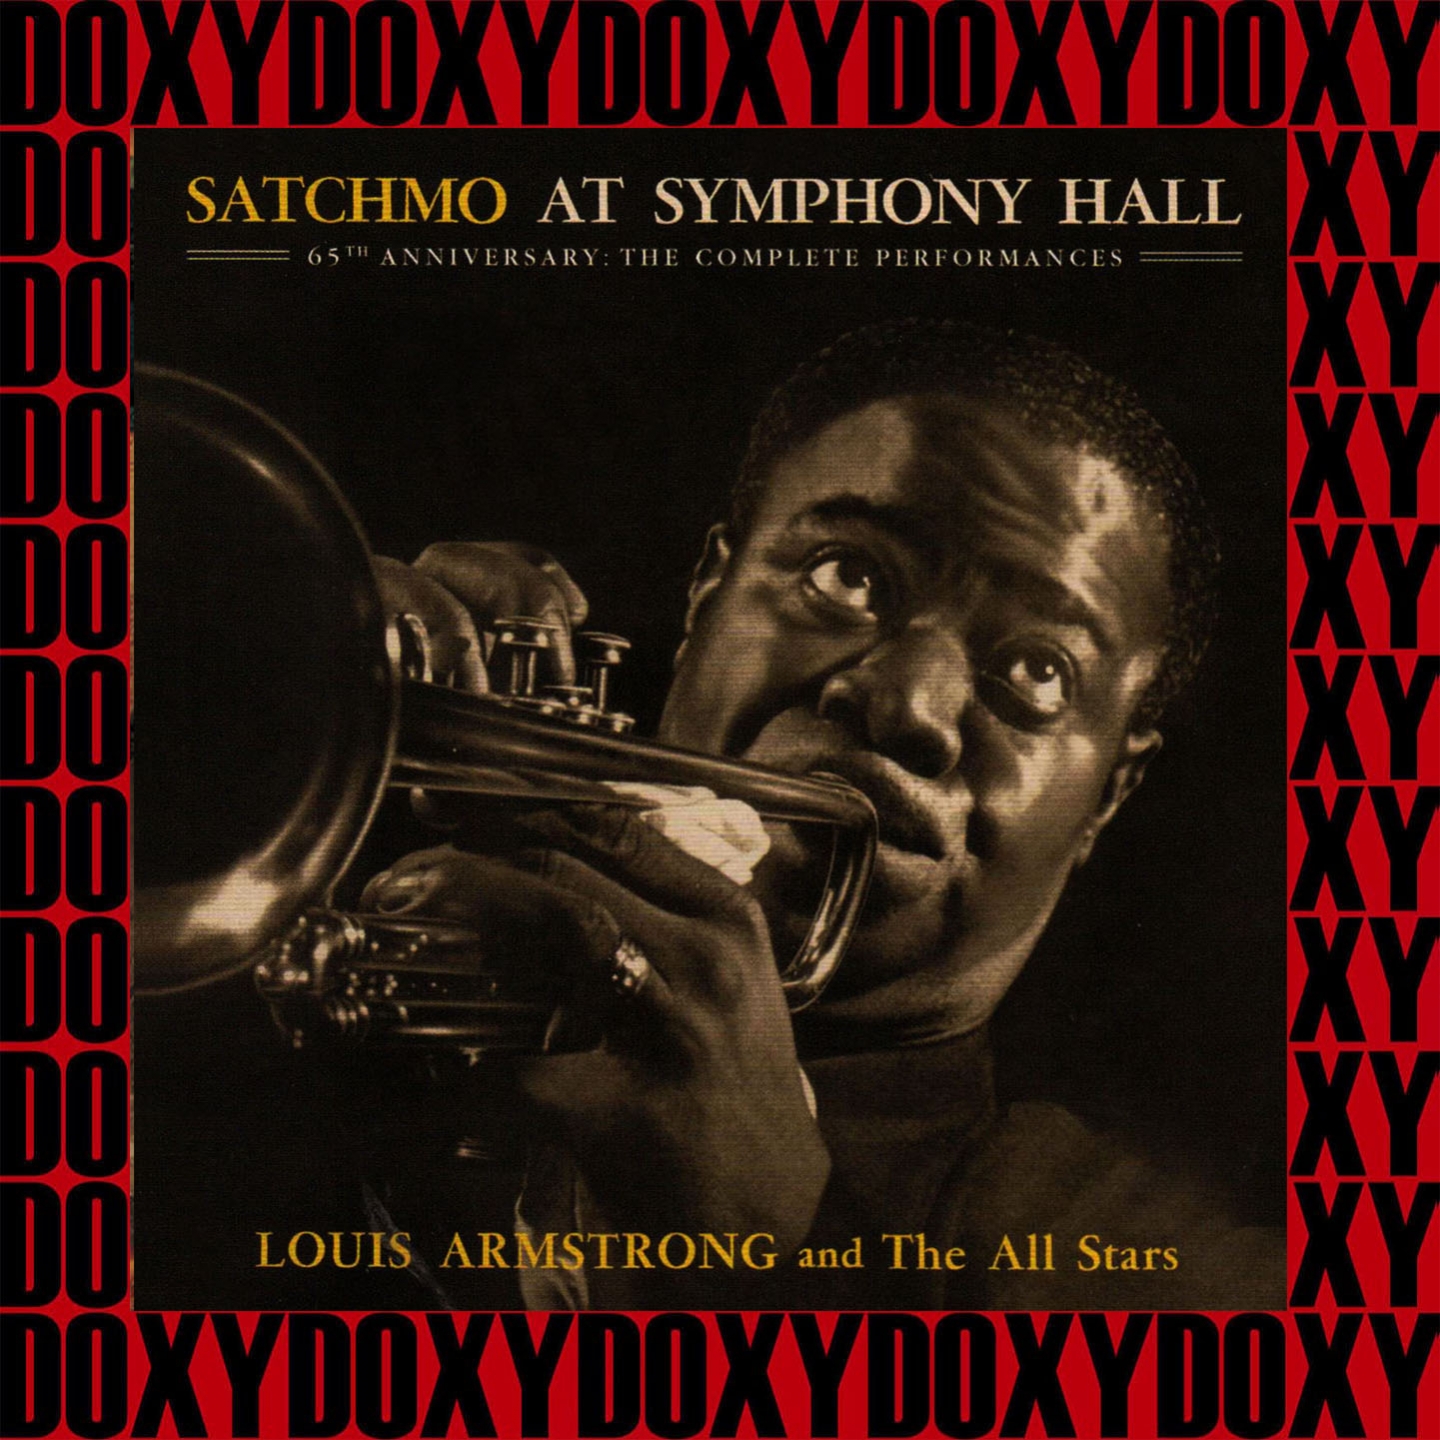 The Complete Satchmo At Symphonic Hall Performances (65th Anniversary, Remastered Version) (Doxy Collection)